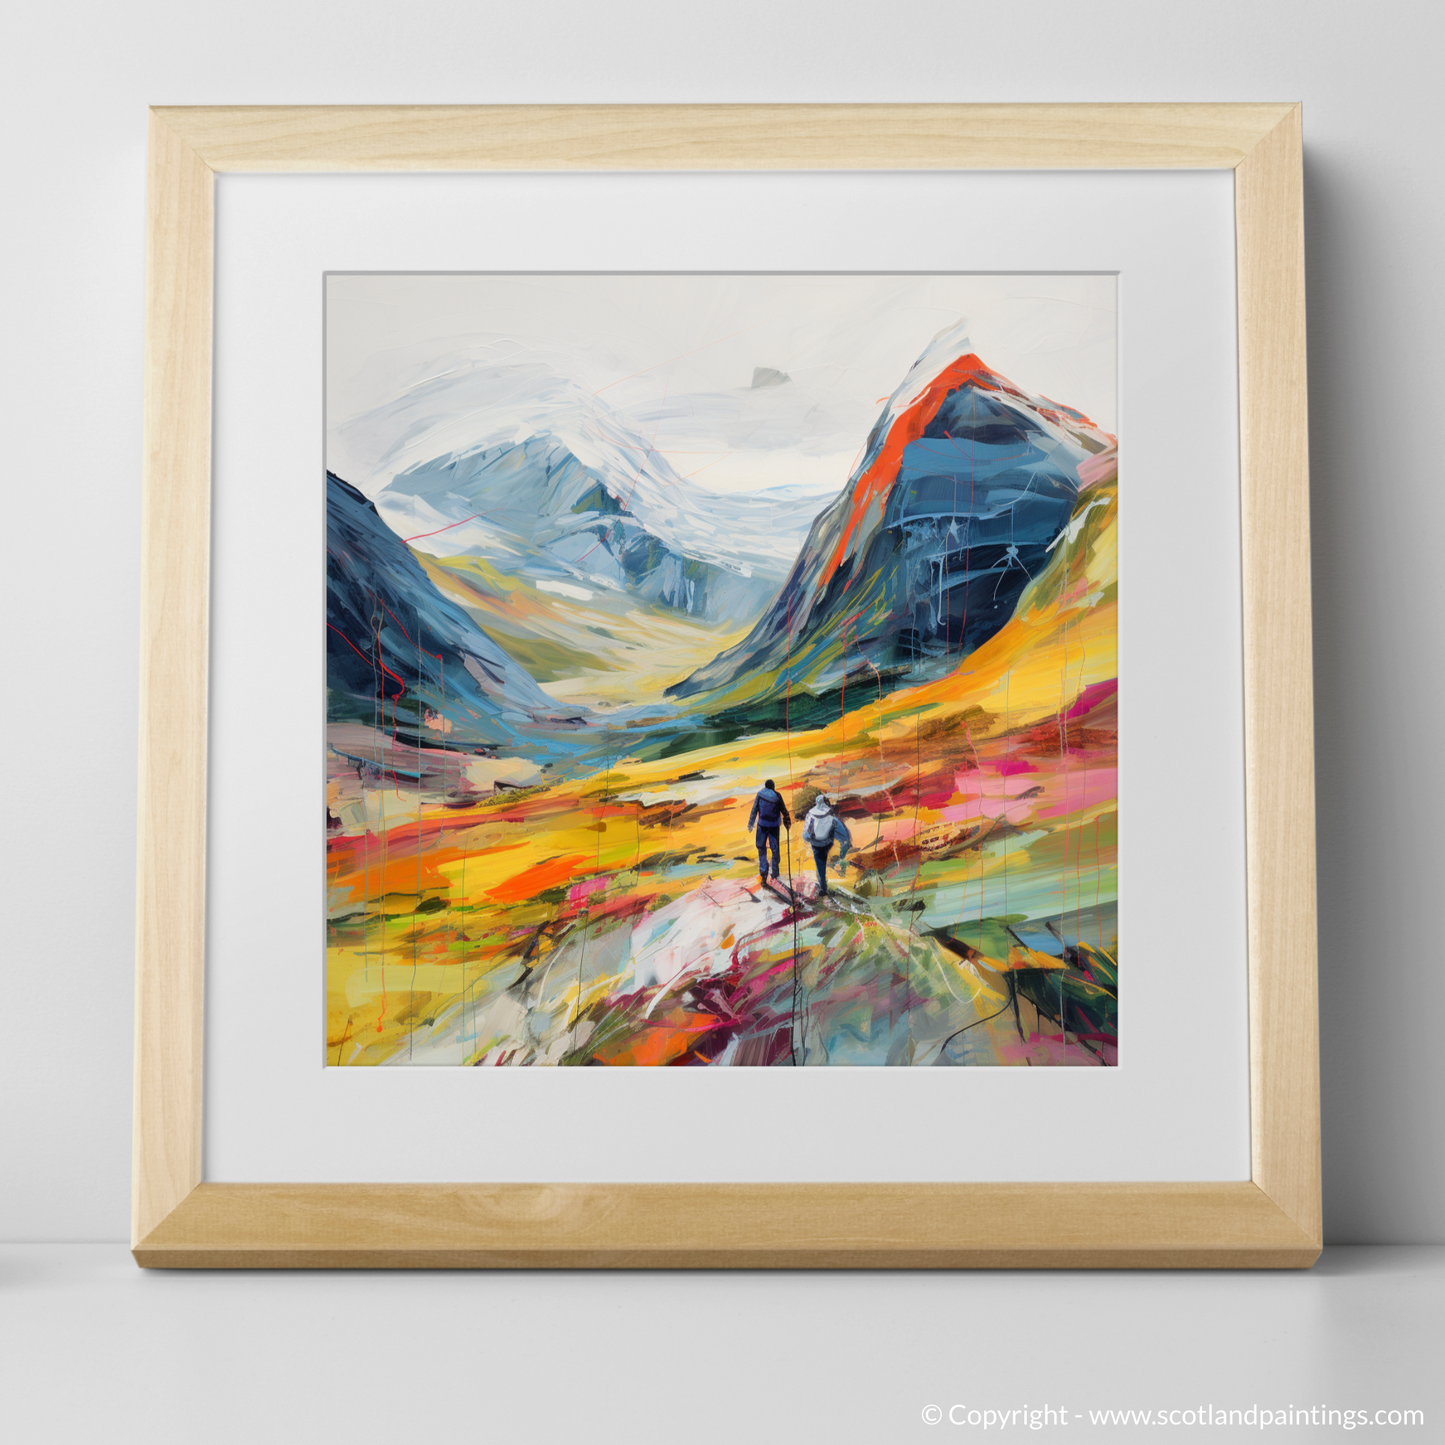 Painting and Art Print of Hikers in Glencoe. Hikers' Odyssey through the Vibrant Glencoe Highlands.